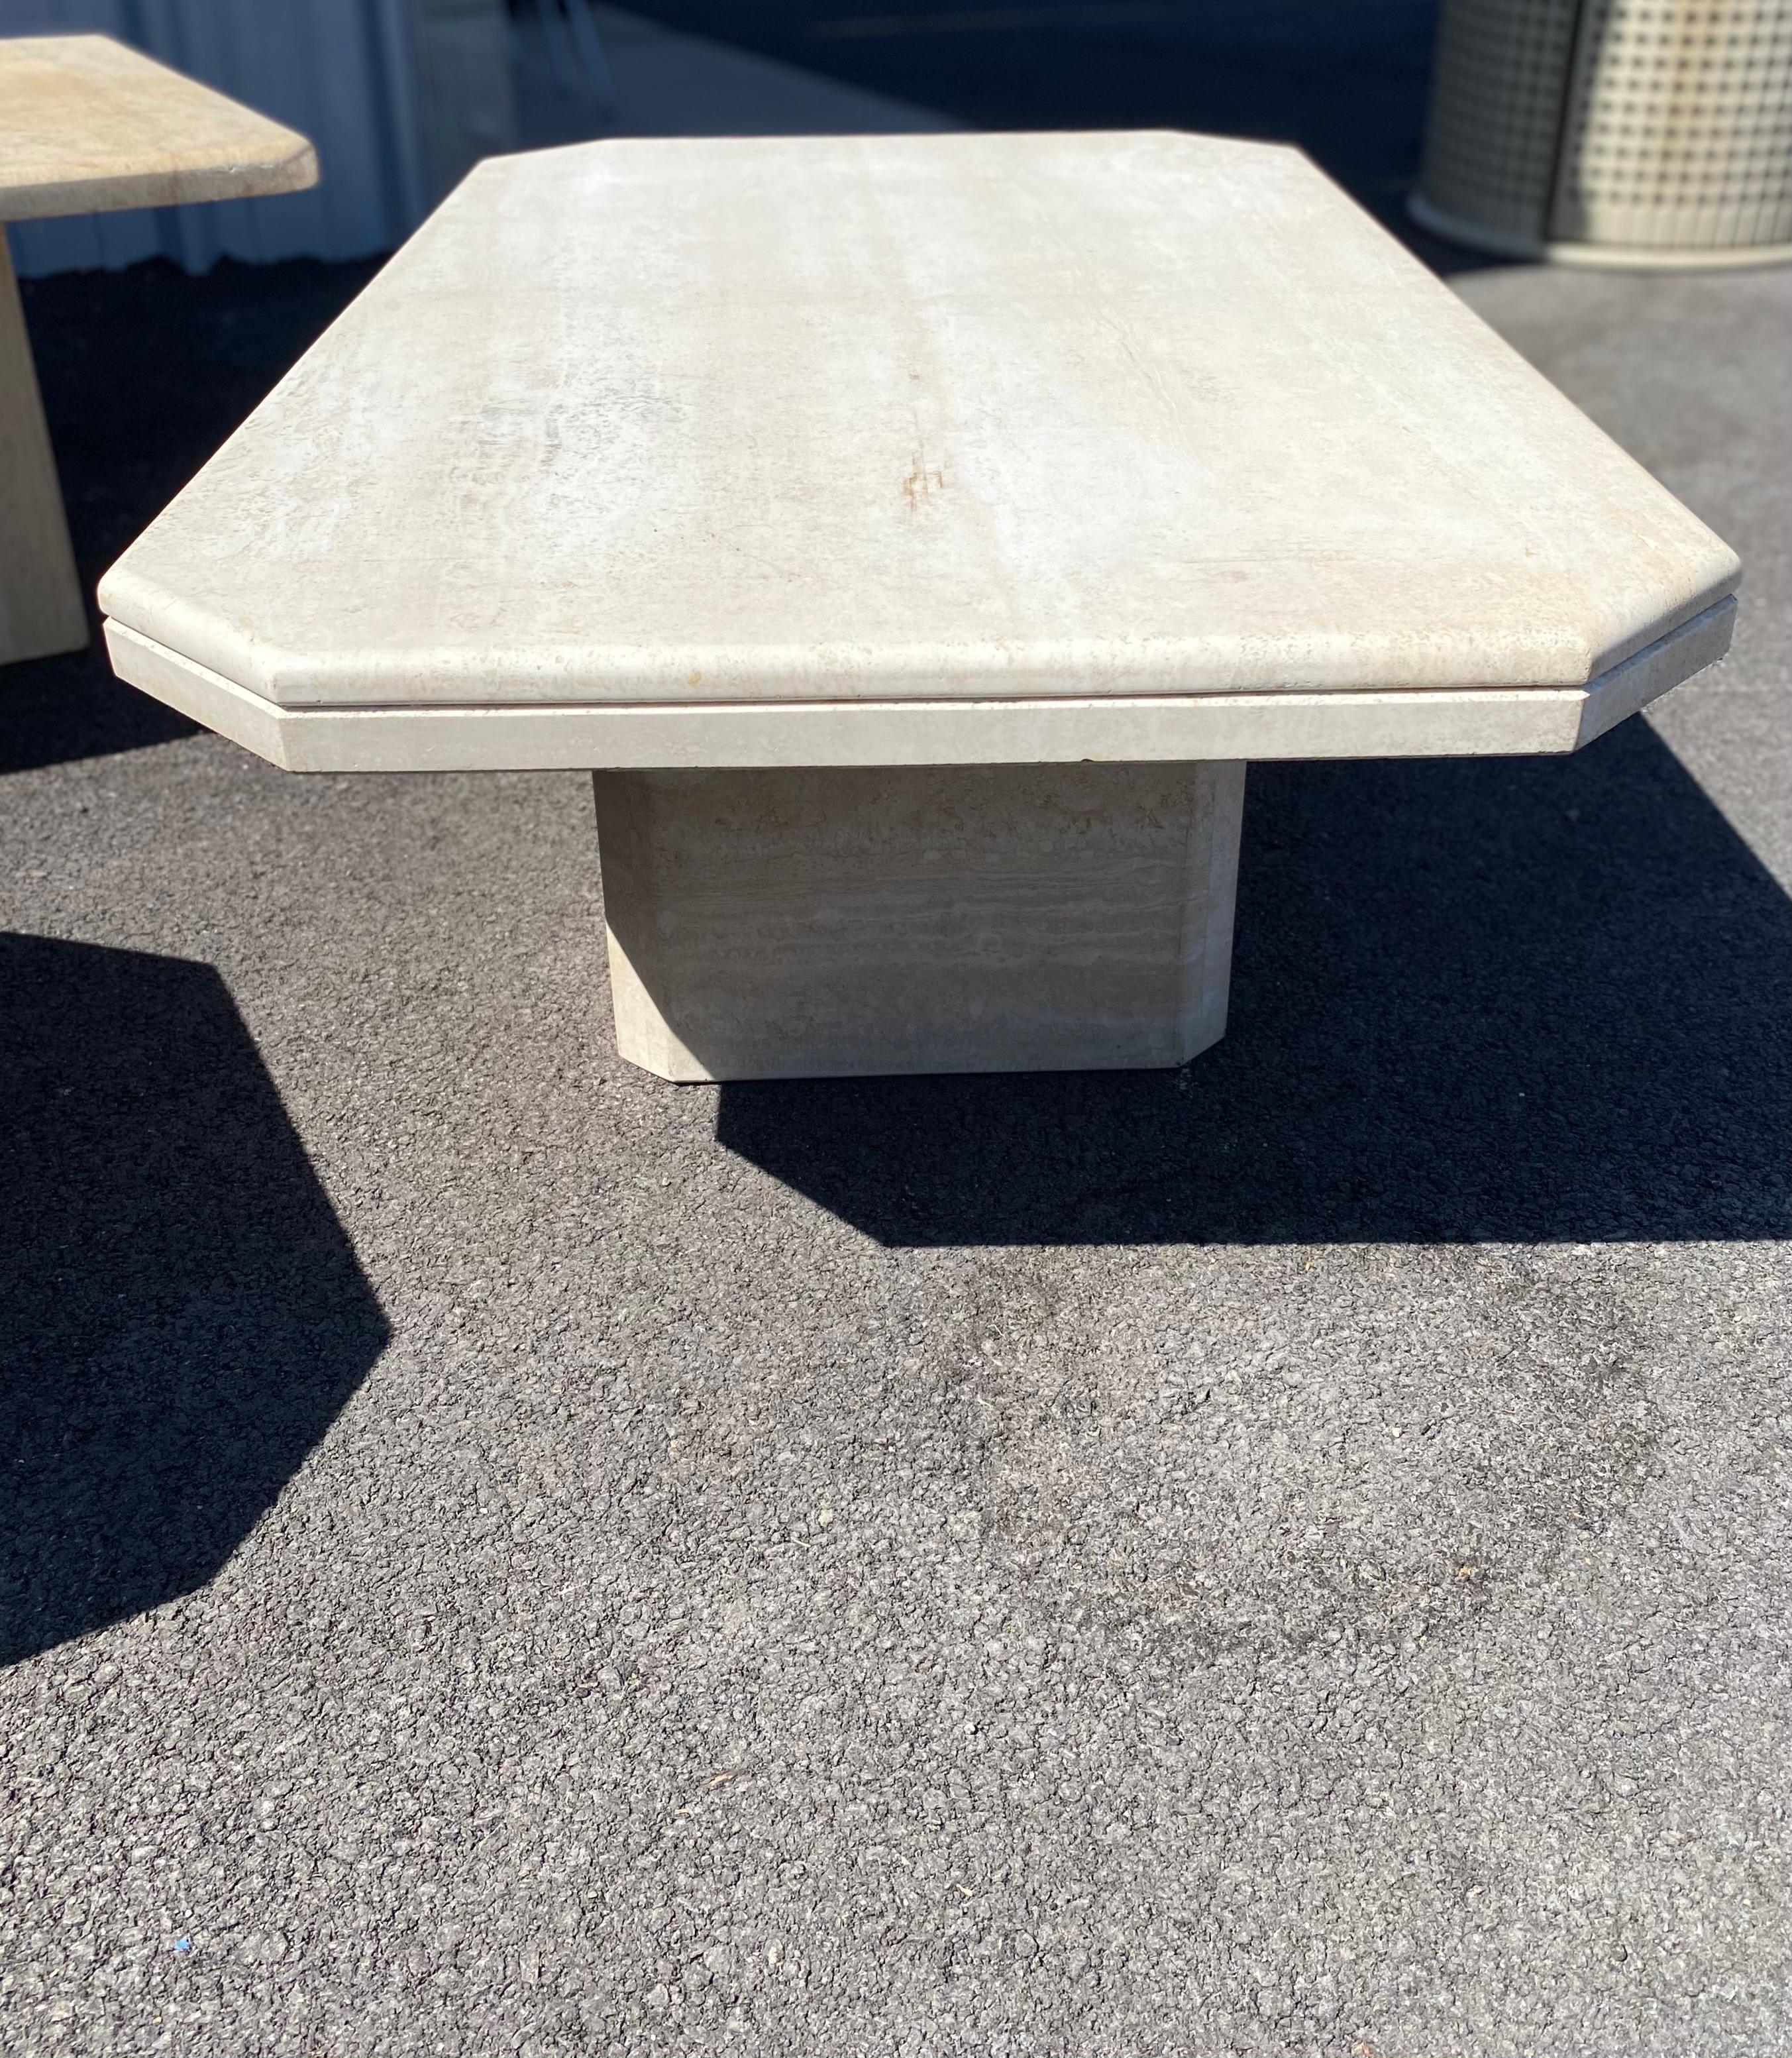 Elegant vintage Italian travertine coffee table circa early 1980s. The coffee table comes in two pieces, pedestal and table top. The table top features carved edges and is in good vintage condition. Color is of a lighter travertine variant. There